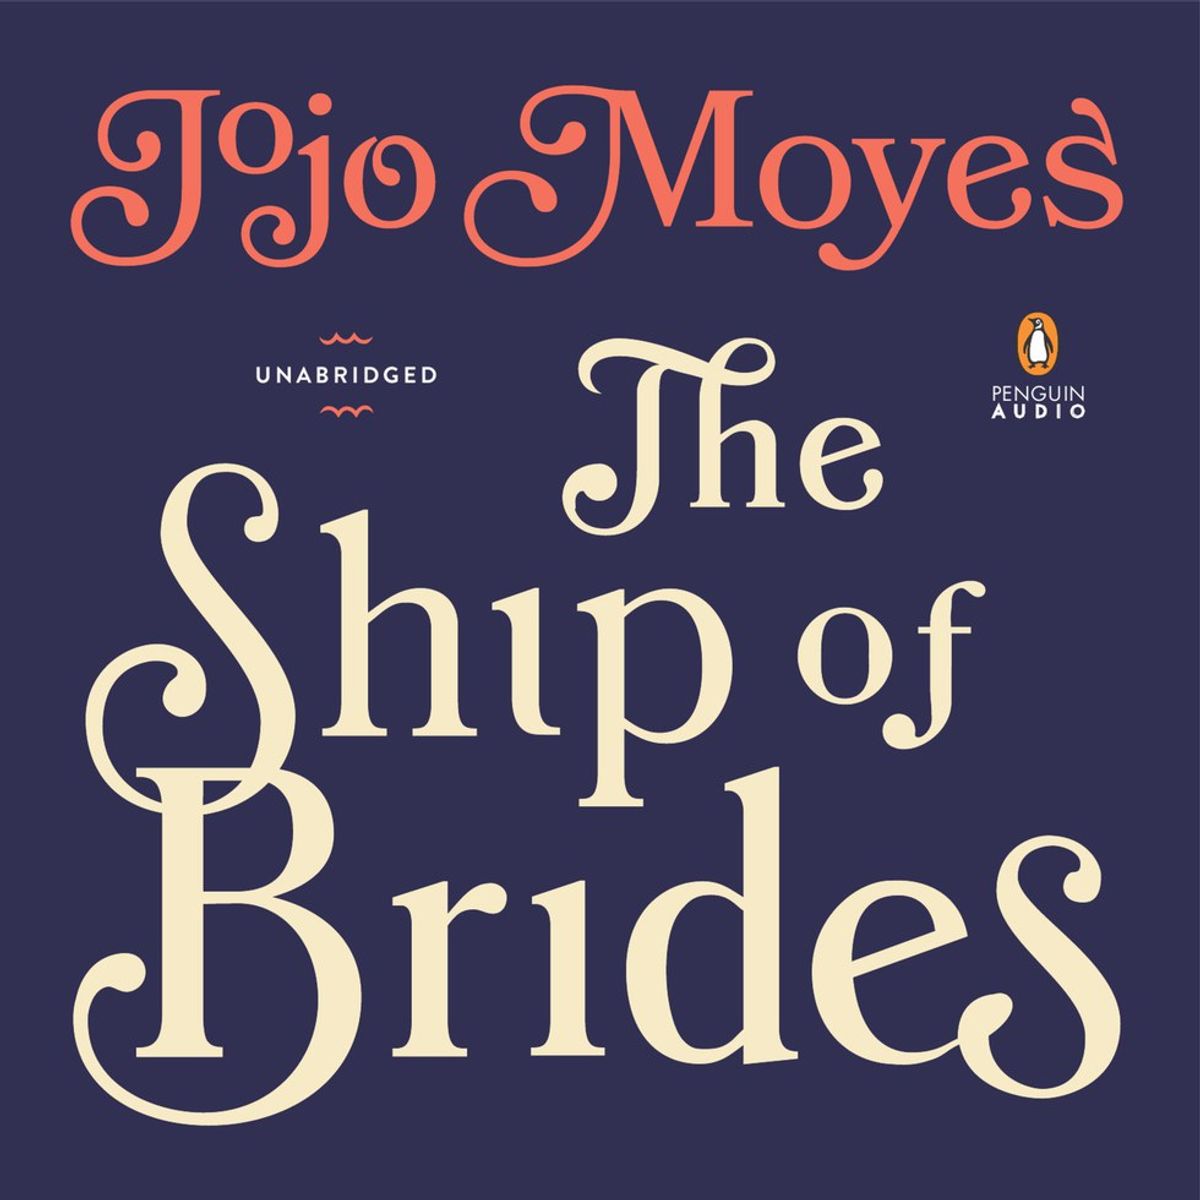 Why You Should Read "The Ship Of Brides" By Jojo Moyes